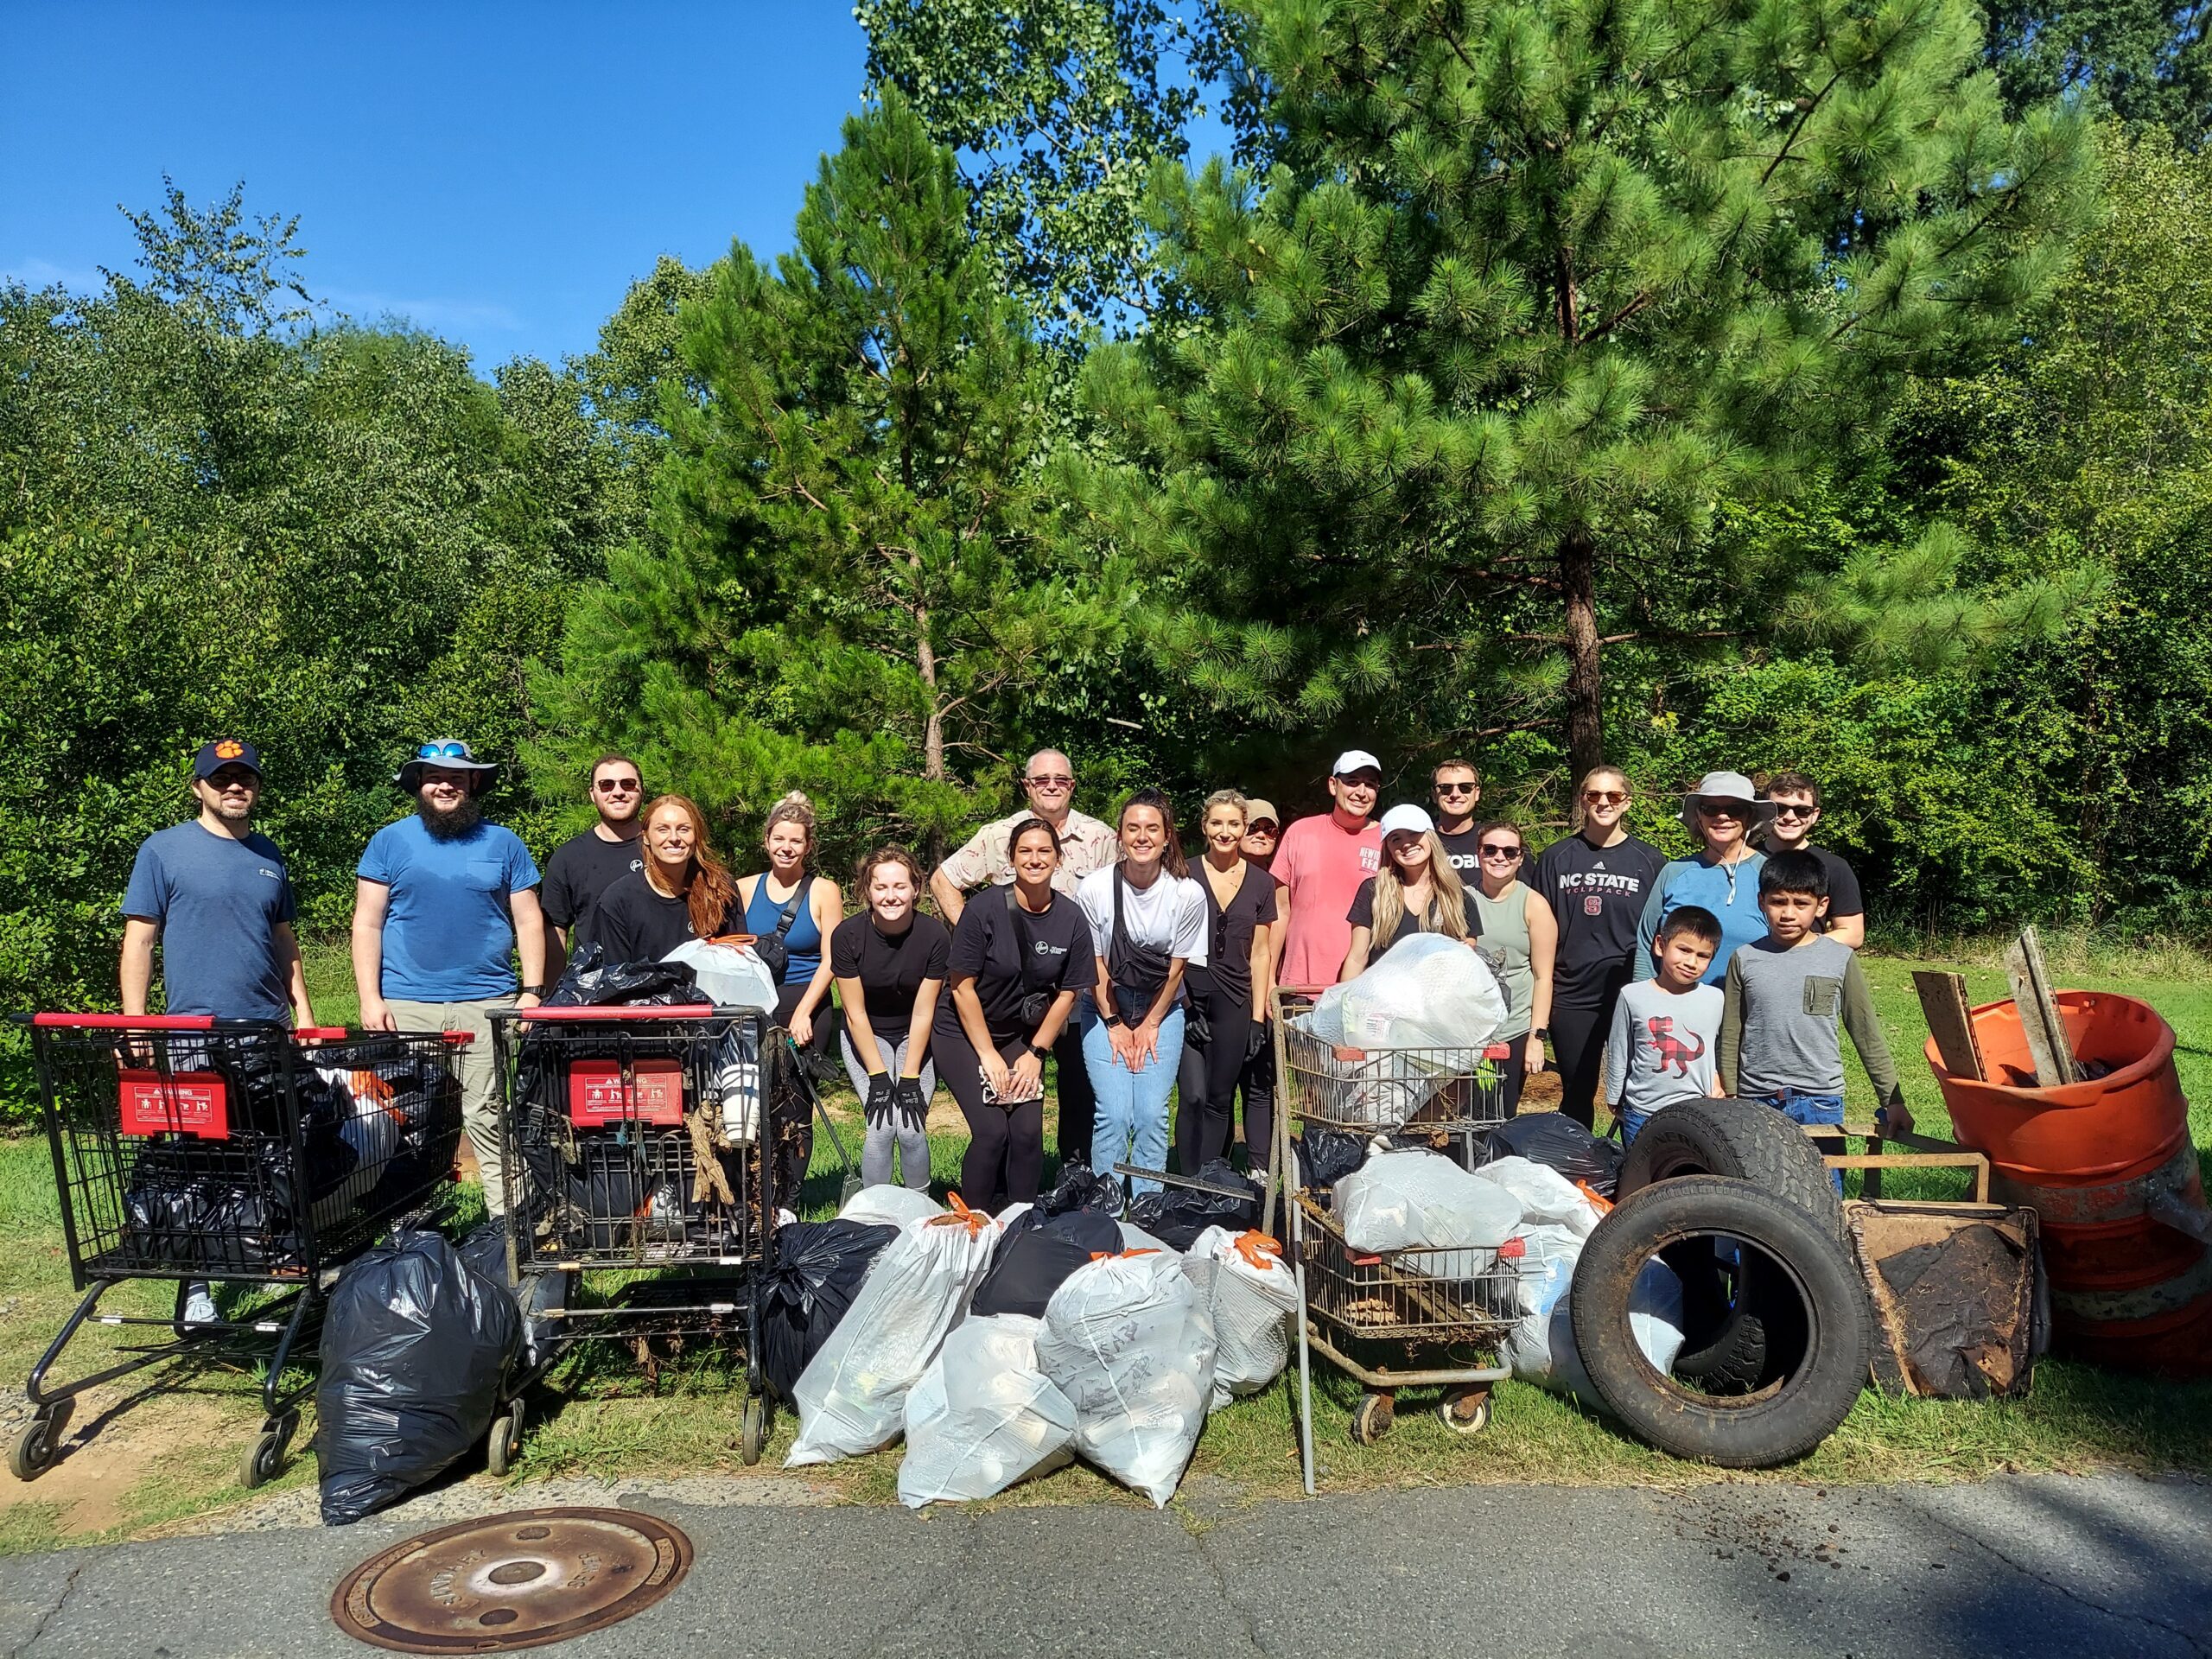 NCWF and volunteers picked up and removed 1,100 pounds of trash from Charlotte’s Hidden Valley neighborhood.
